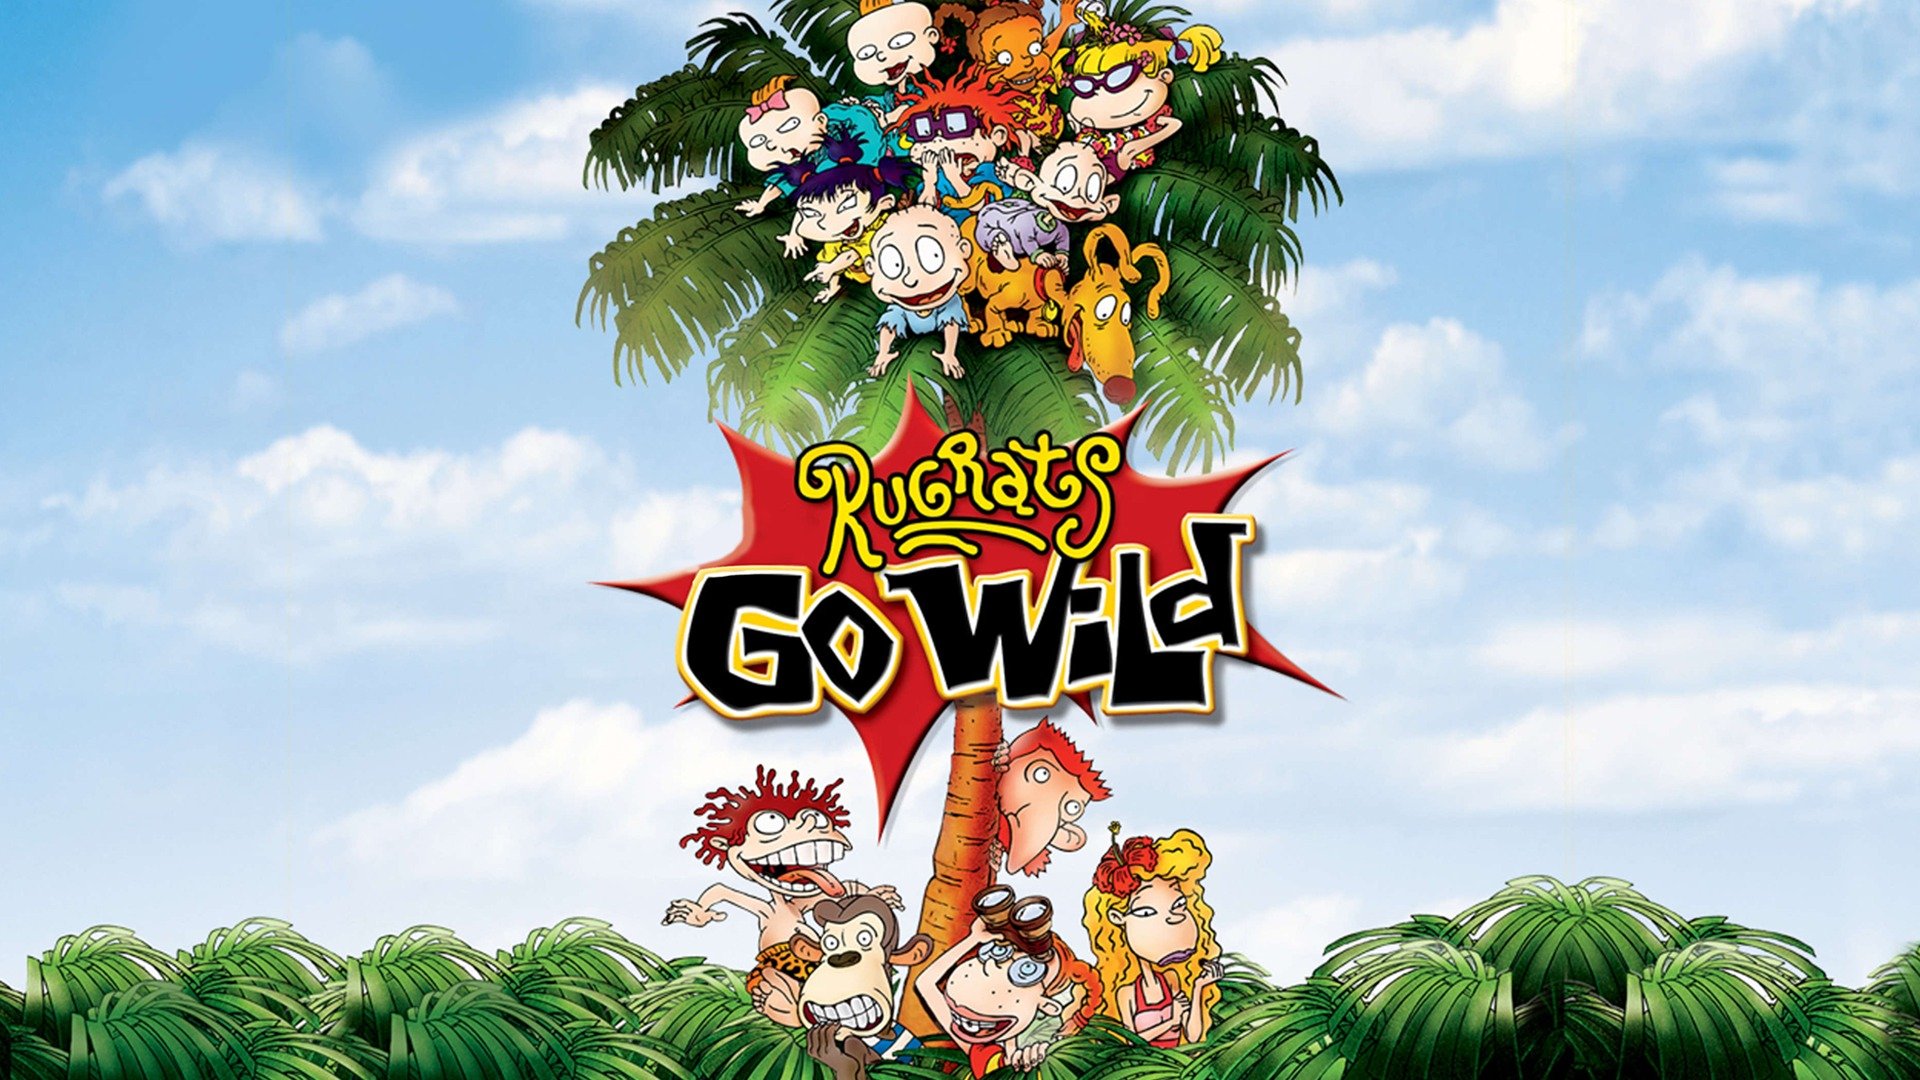 Rugrats Go Wild Trailer 1 Trailers And Videos Rotten Tomatoes